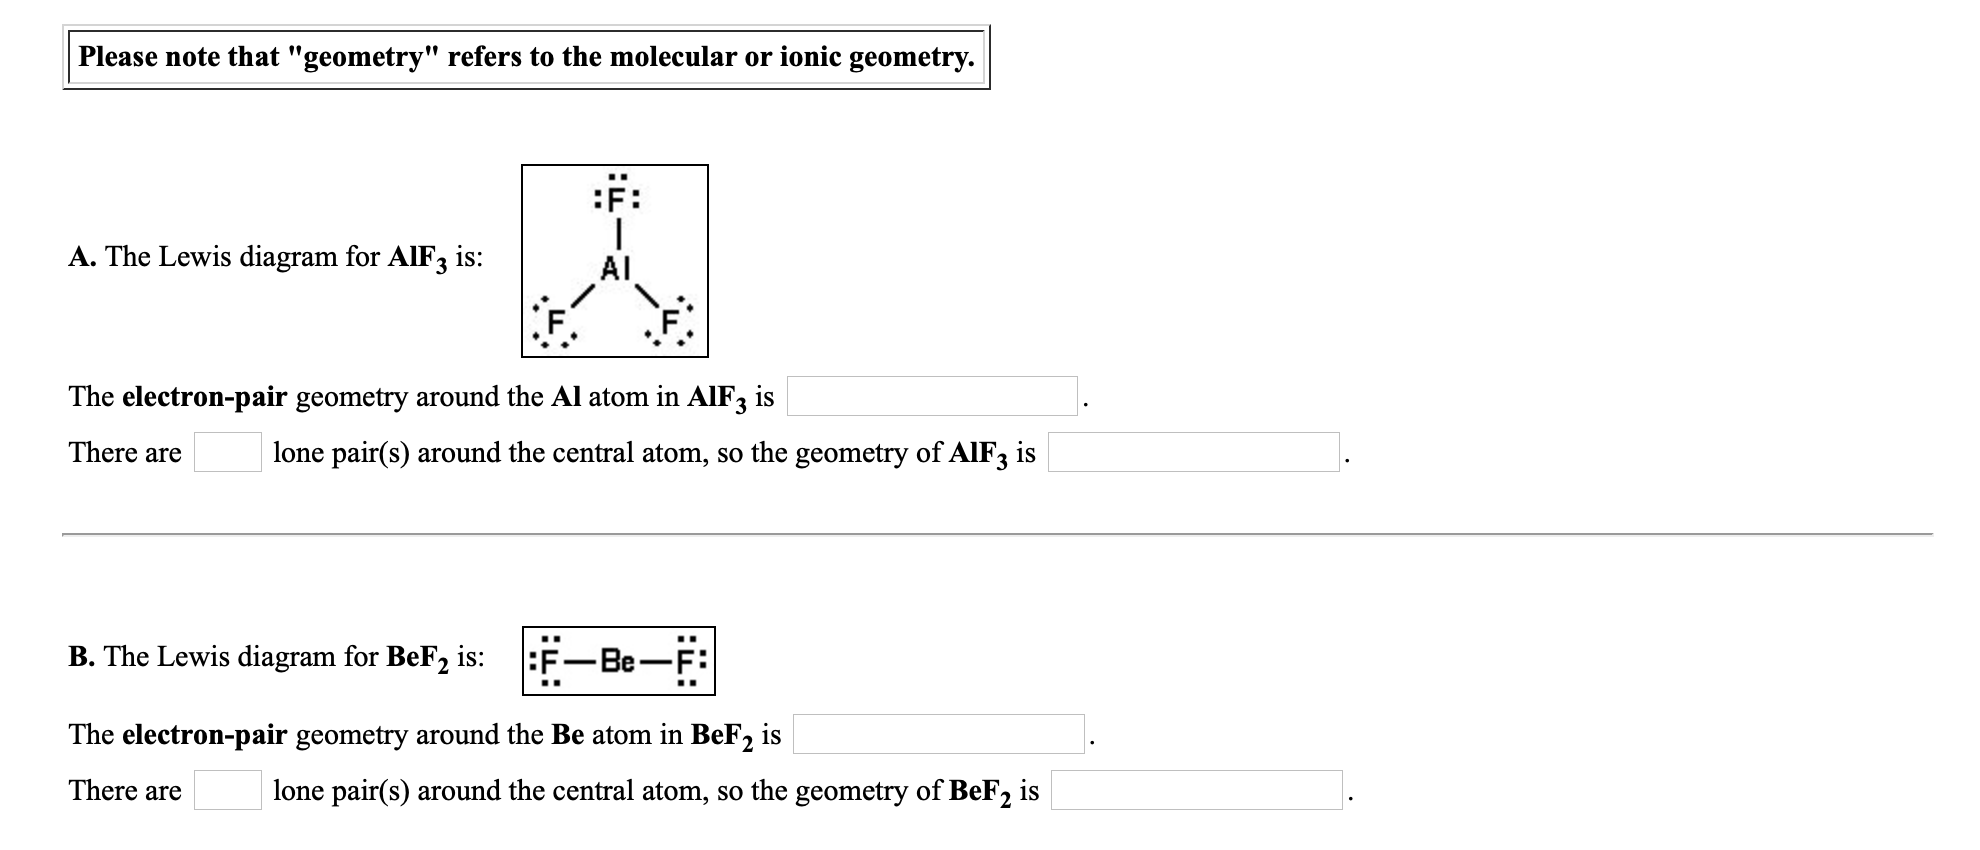 :F:
A. The Lewis diagram for AIF3 is:
Al
:F.
The electron-pair geometry around the Al atom in AIF3 is
There are
lone pair(s) around the central atom, so the geometry of AlF, is
B. The Lewis diagram for BeF2
is:
:F-Be-F:
The electron-pair geometry around the Be atom in BeF2 is
There are
lone pair(s) around the central atom, so the geometry of BeF2 is
